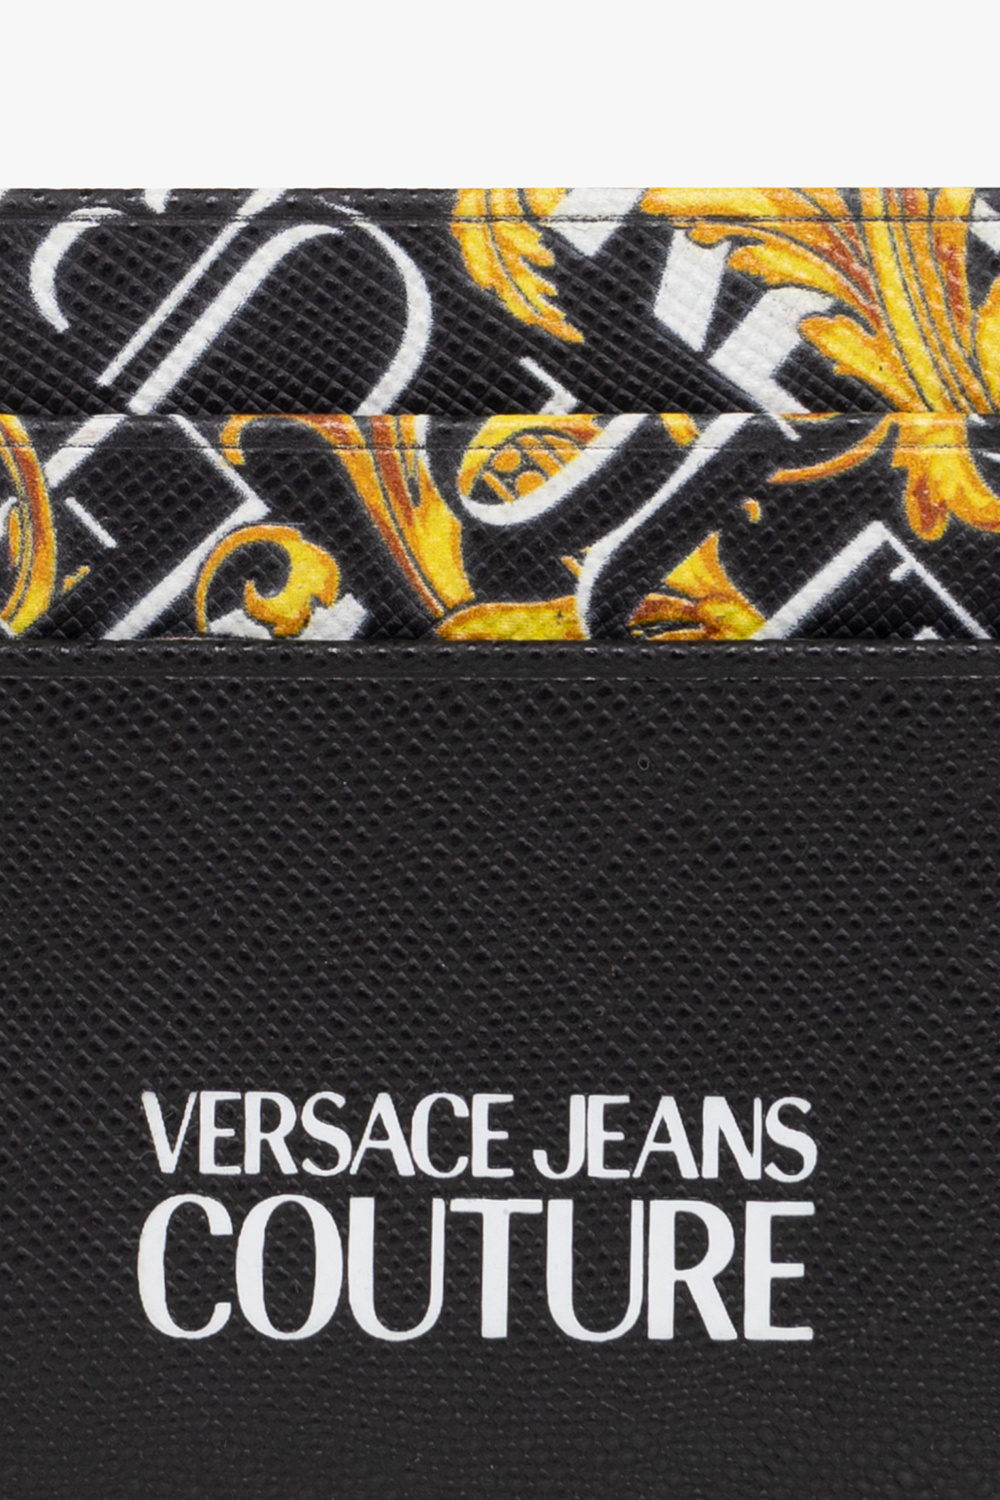 Versace jeans seam Couture Patterned card holder